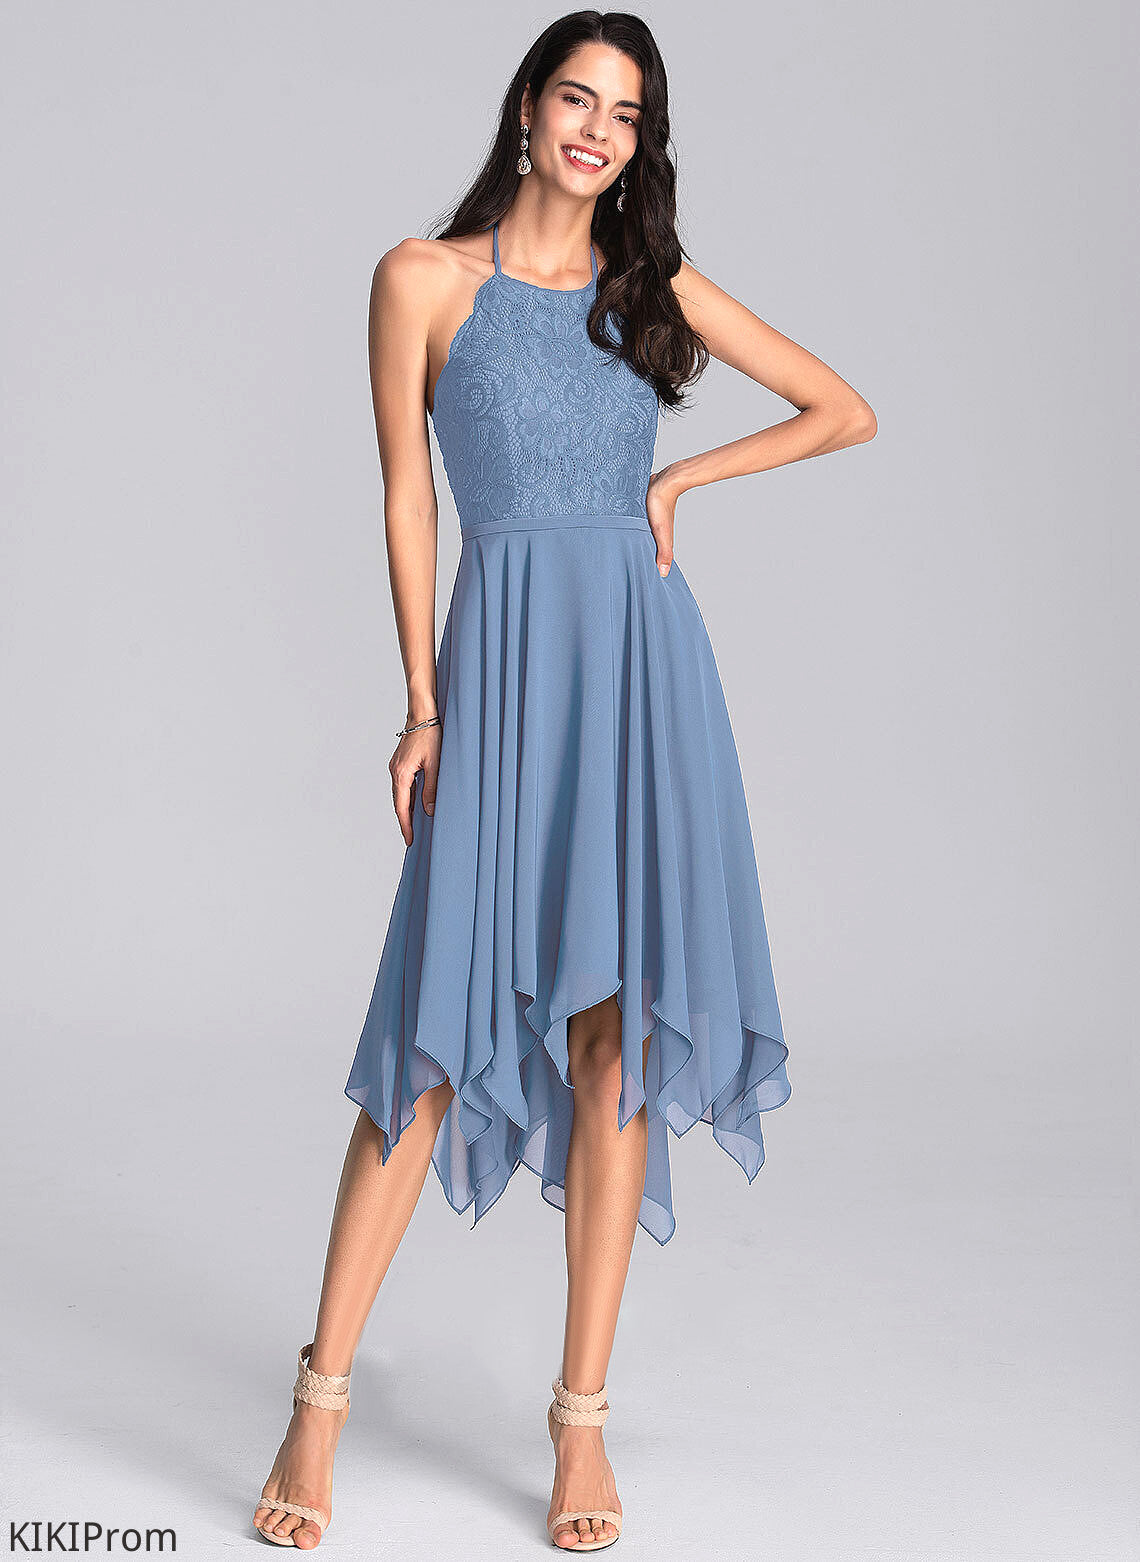 With Homecoming Dresses Halter Chiffon Yasmine A-Line Asymmetrical Lace Dress Homecoming